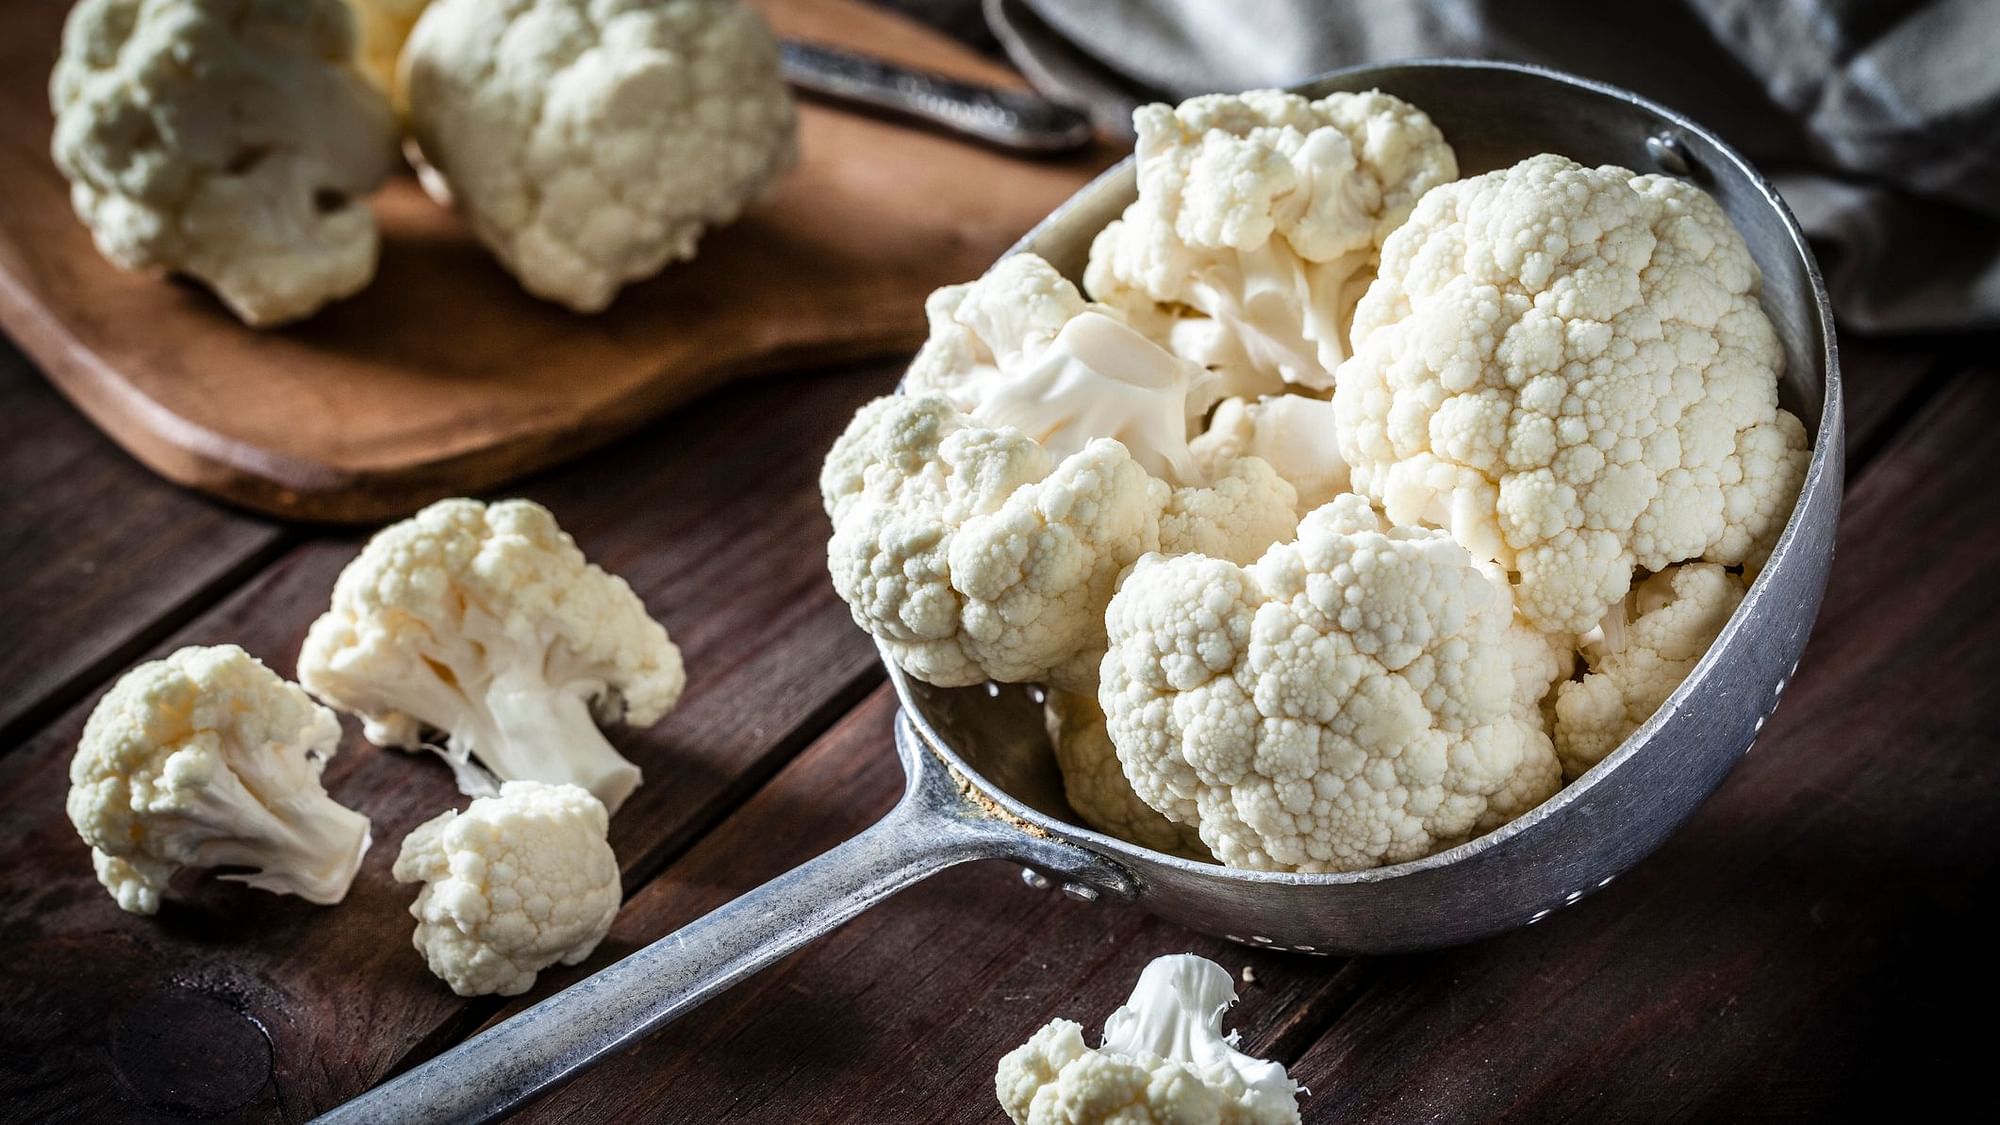 Cauliflower doesn&apos;t spoil quickly so can be stored for long during quarantine.